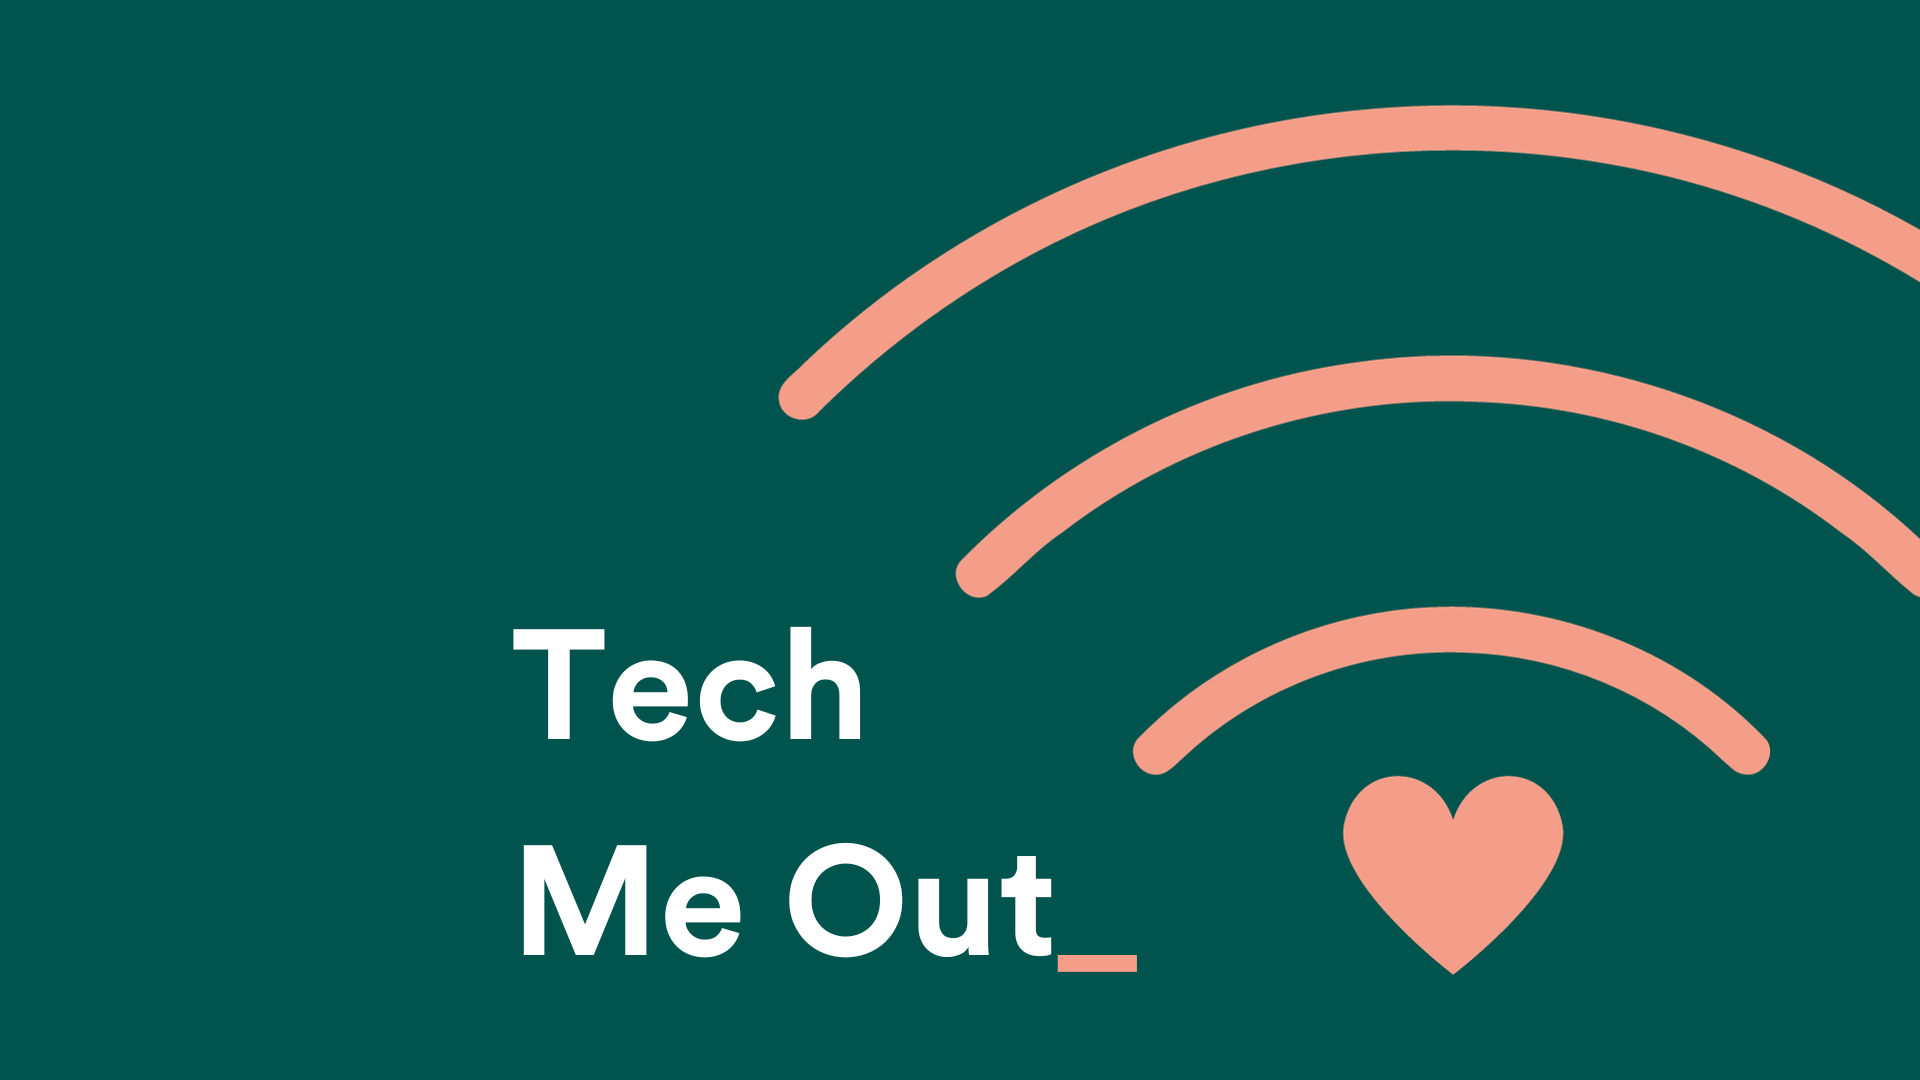 Tech me out: A beginners guide to bots